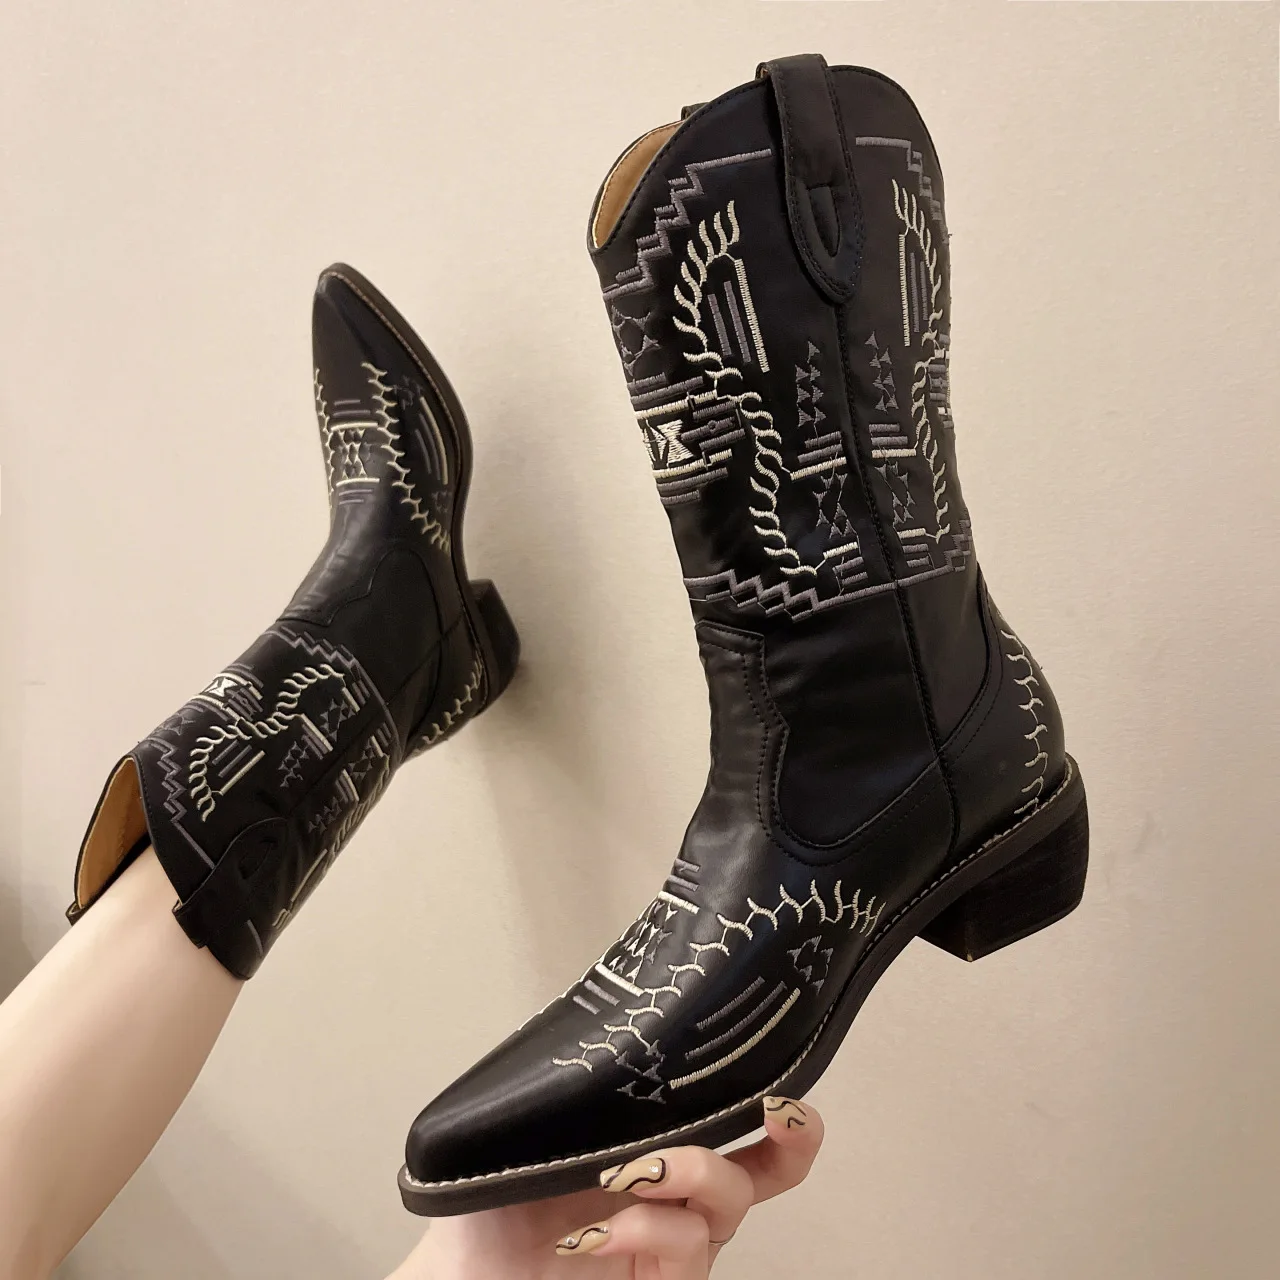 

New Pointed Toe V-mouth Short Boots Women's New Mid-heel Retro Embroidery Martin Boots Knight High Barrel Western Cowboy Boots